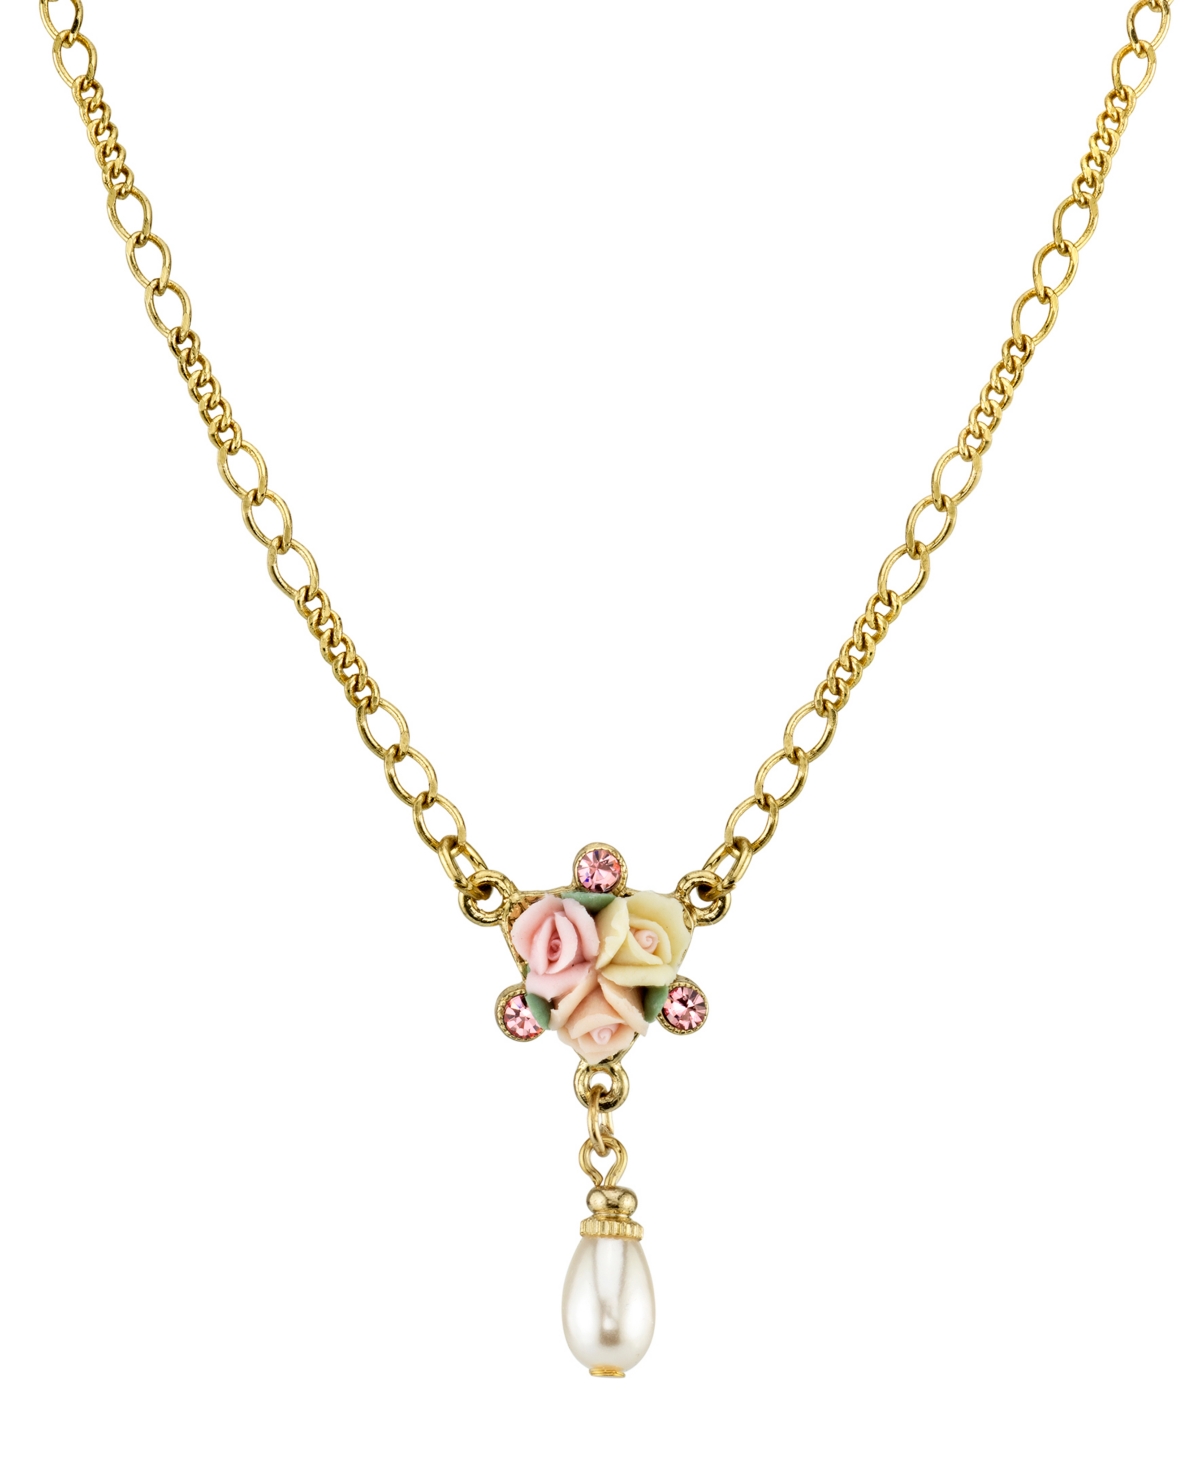 2028 Gold-tone Crystal Ivory And Pink Porcelain Rose Simulated Pearl Necklace 16" Adjustable